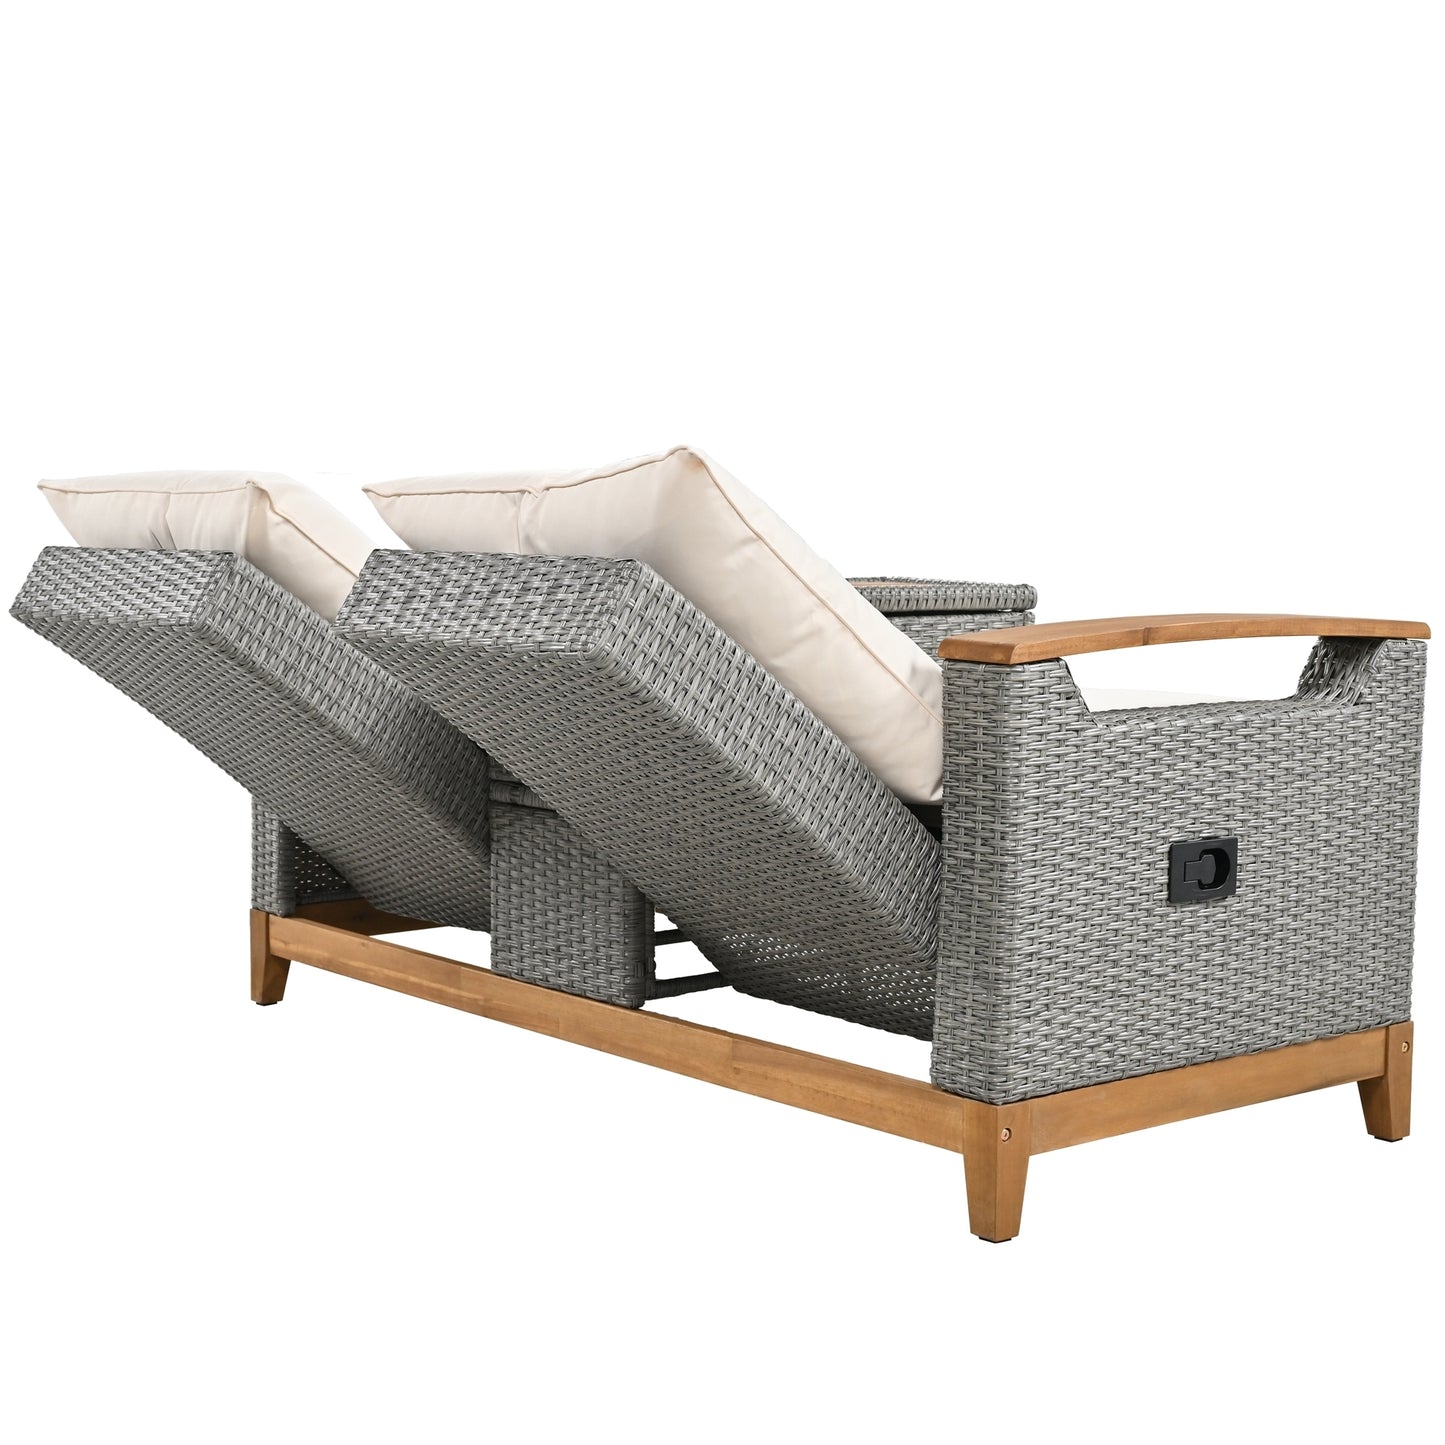 Outdoor Comfort Adjustable Loveseat, Armrest With Storage Space With 2 Colors, Suitable For Courtyards, Swimming Pools And Balconies, etc.